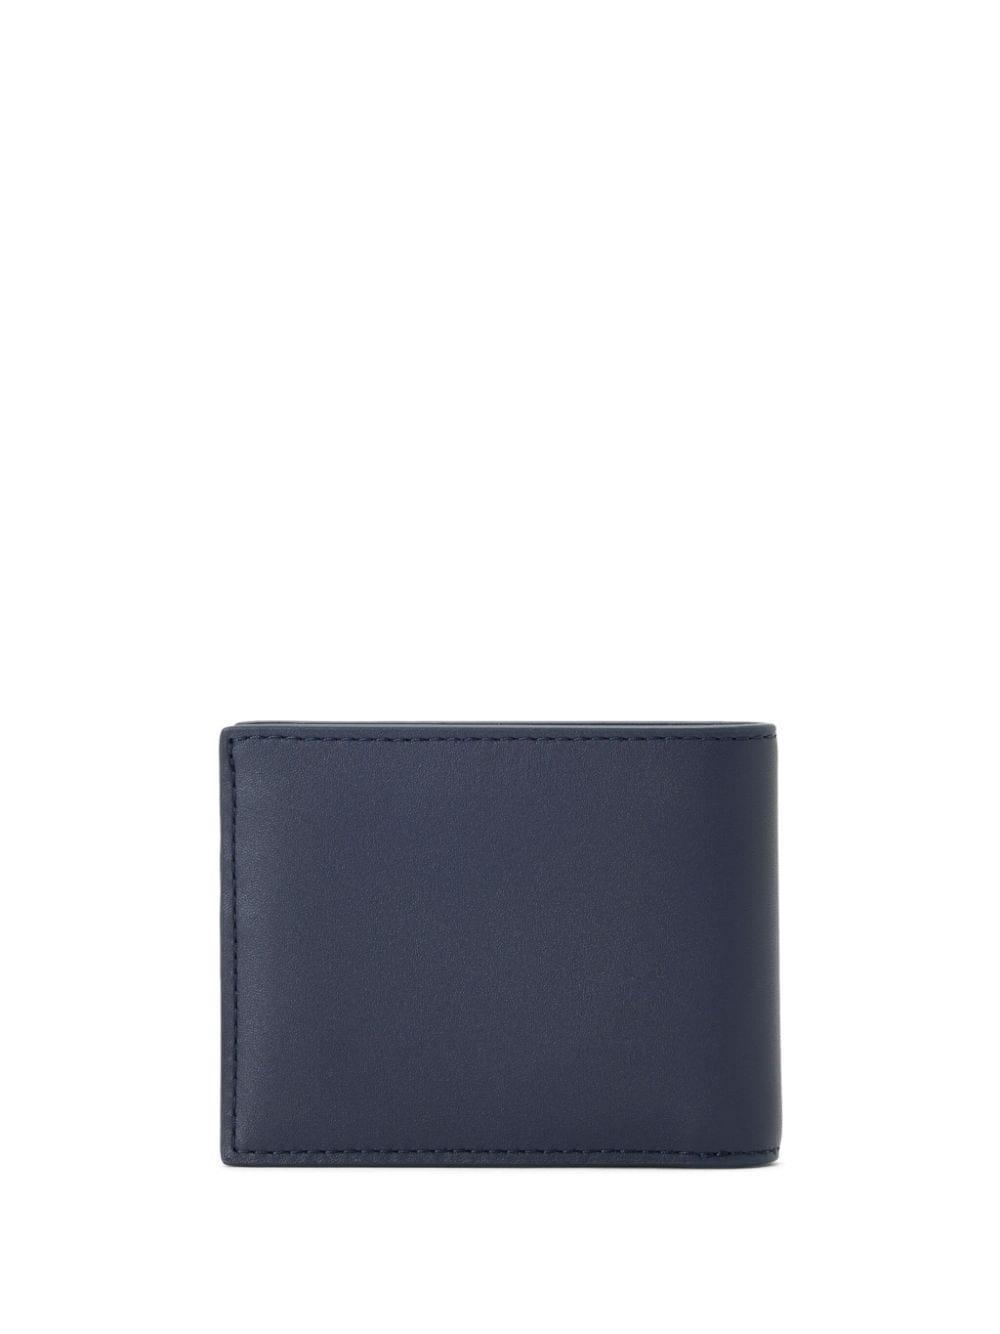 Lacoste Fitzgerald leather wallet - Blue